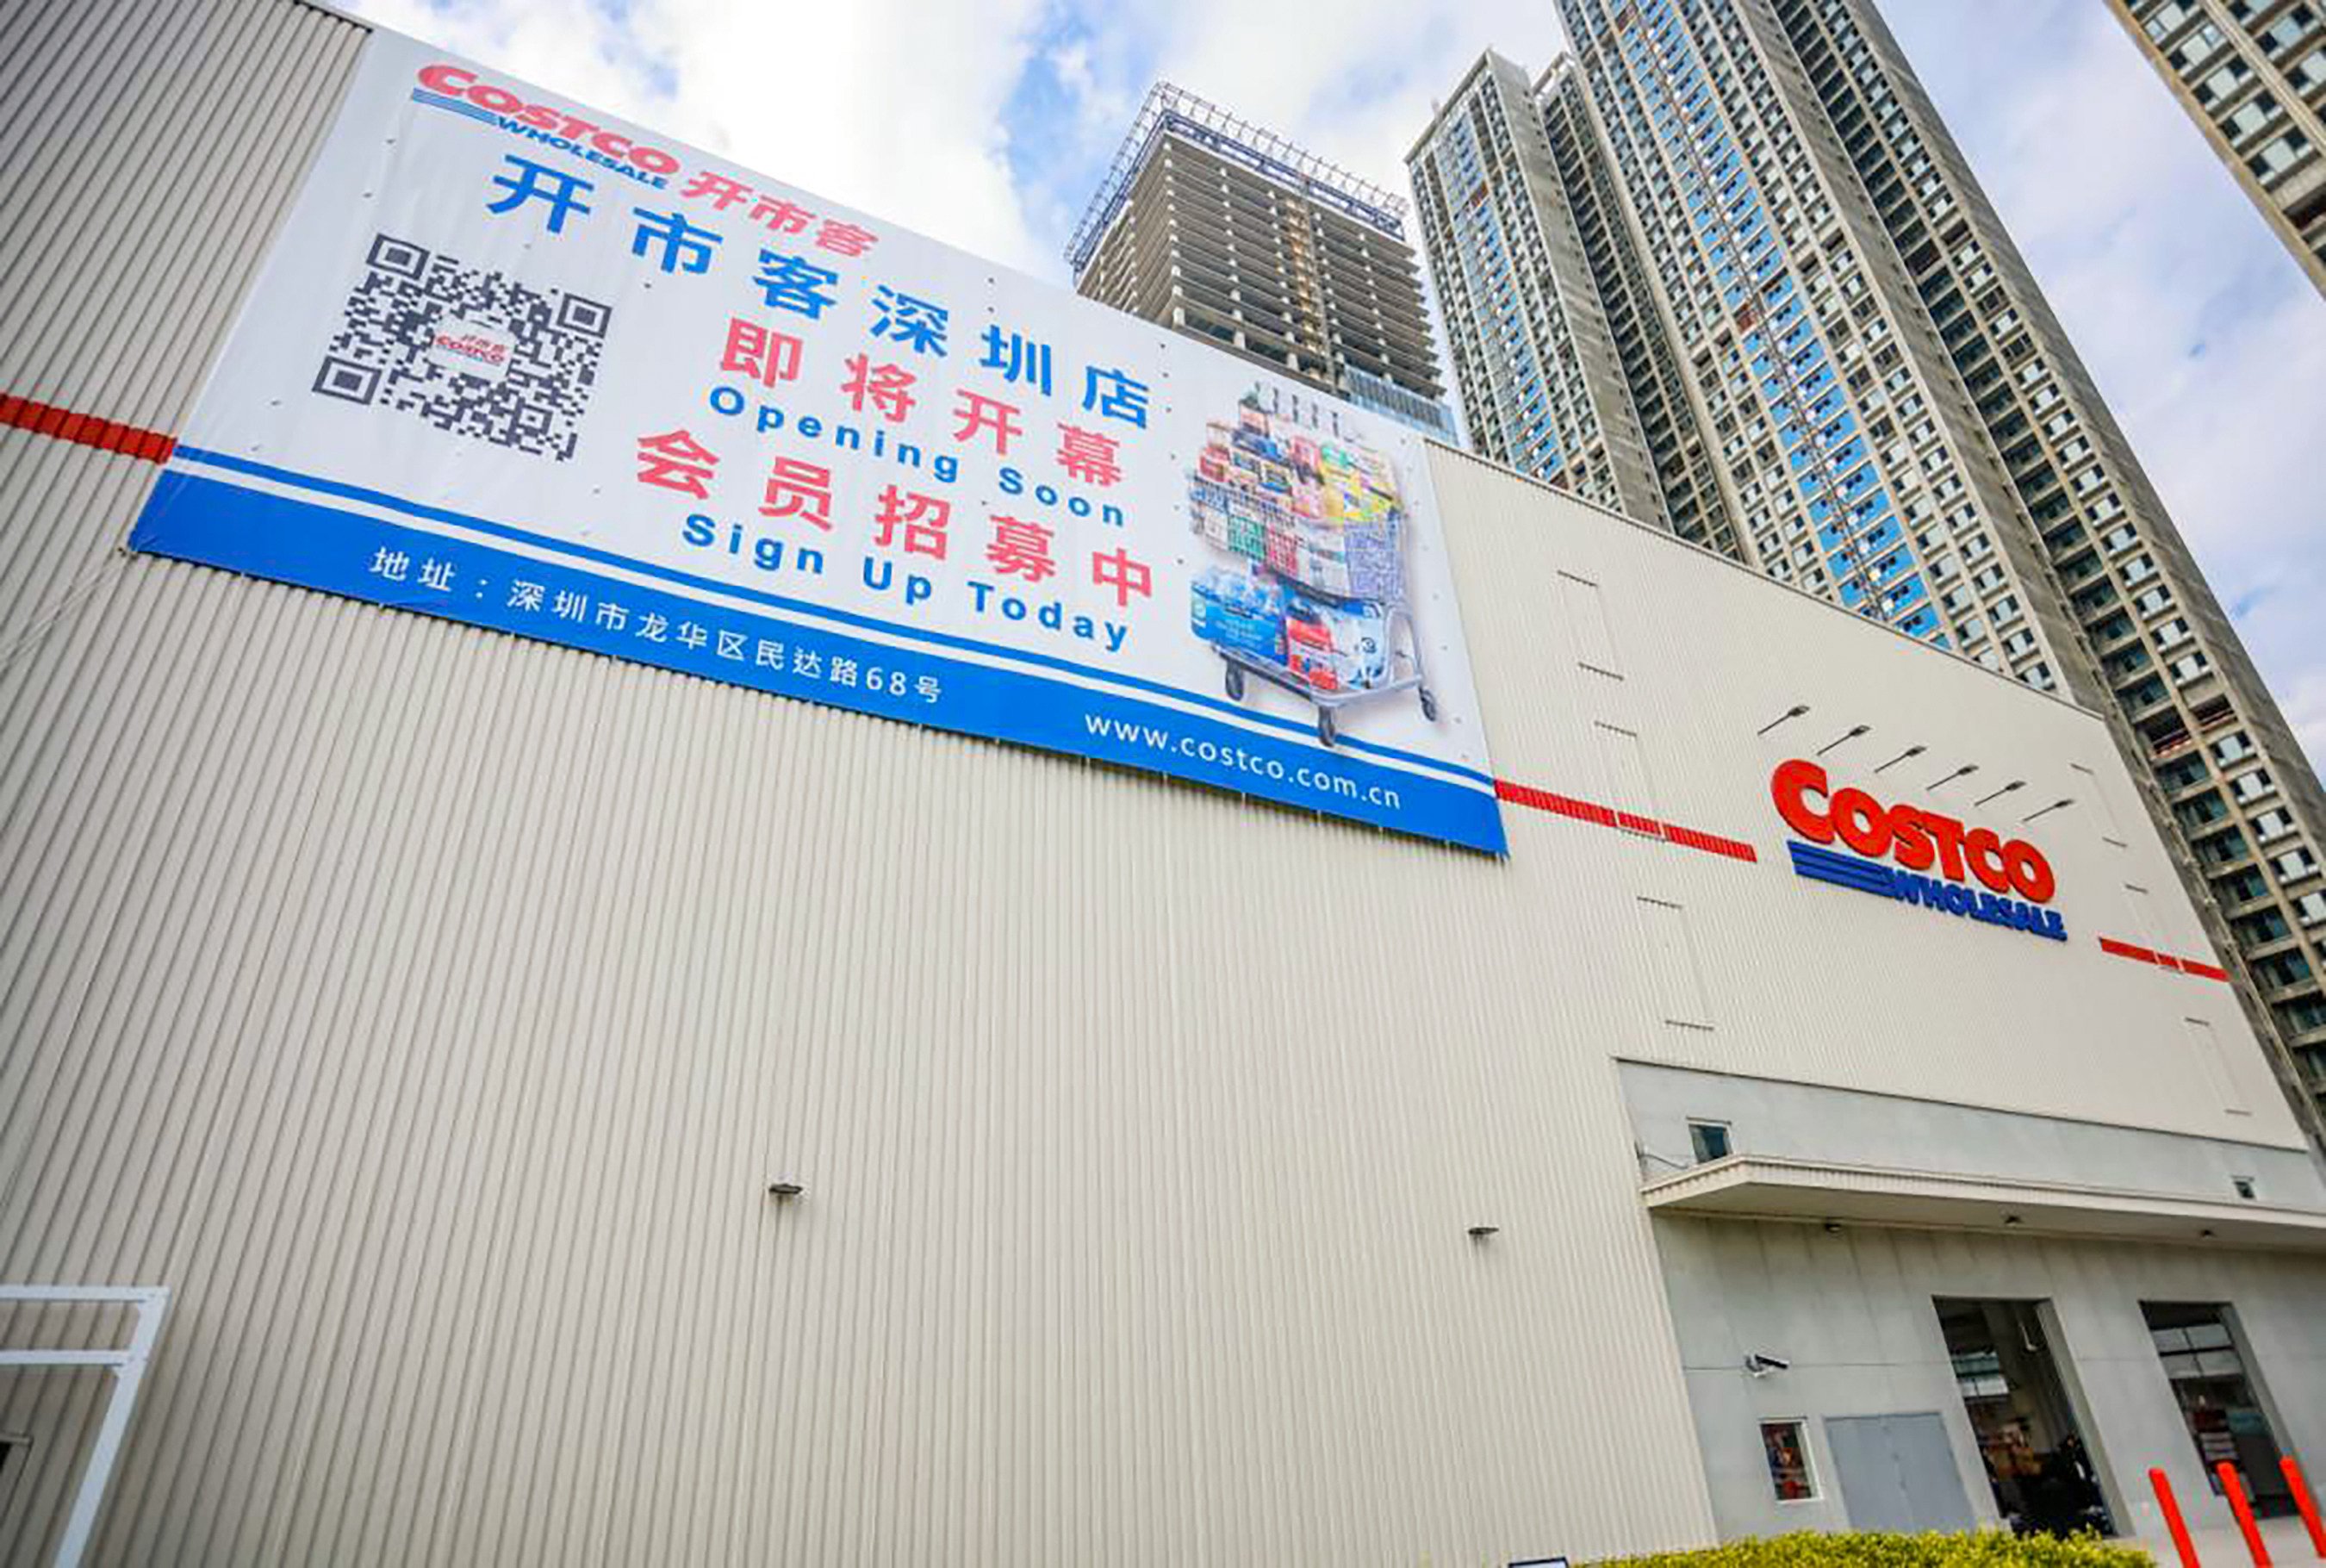 Costco Wholesale’s new store in Shenzhen’s Longhua district opens next Friday. Photo: Longhua Government Online